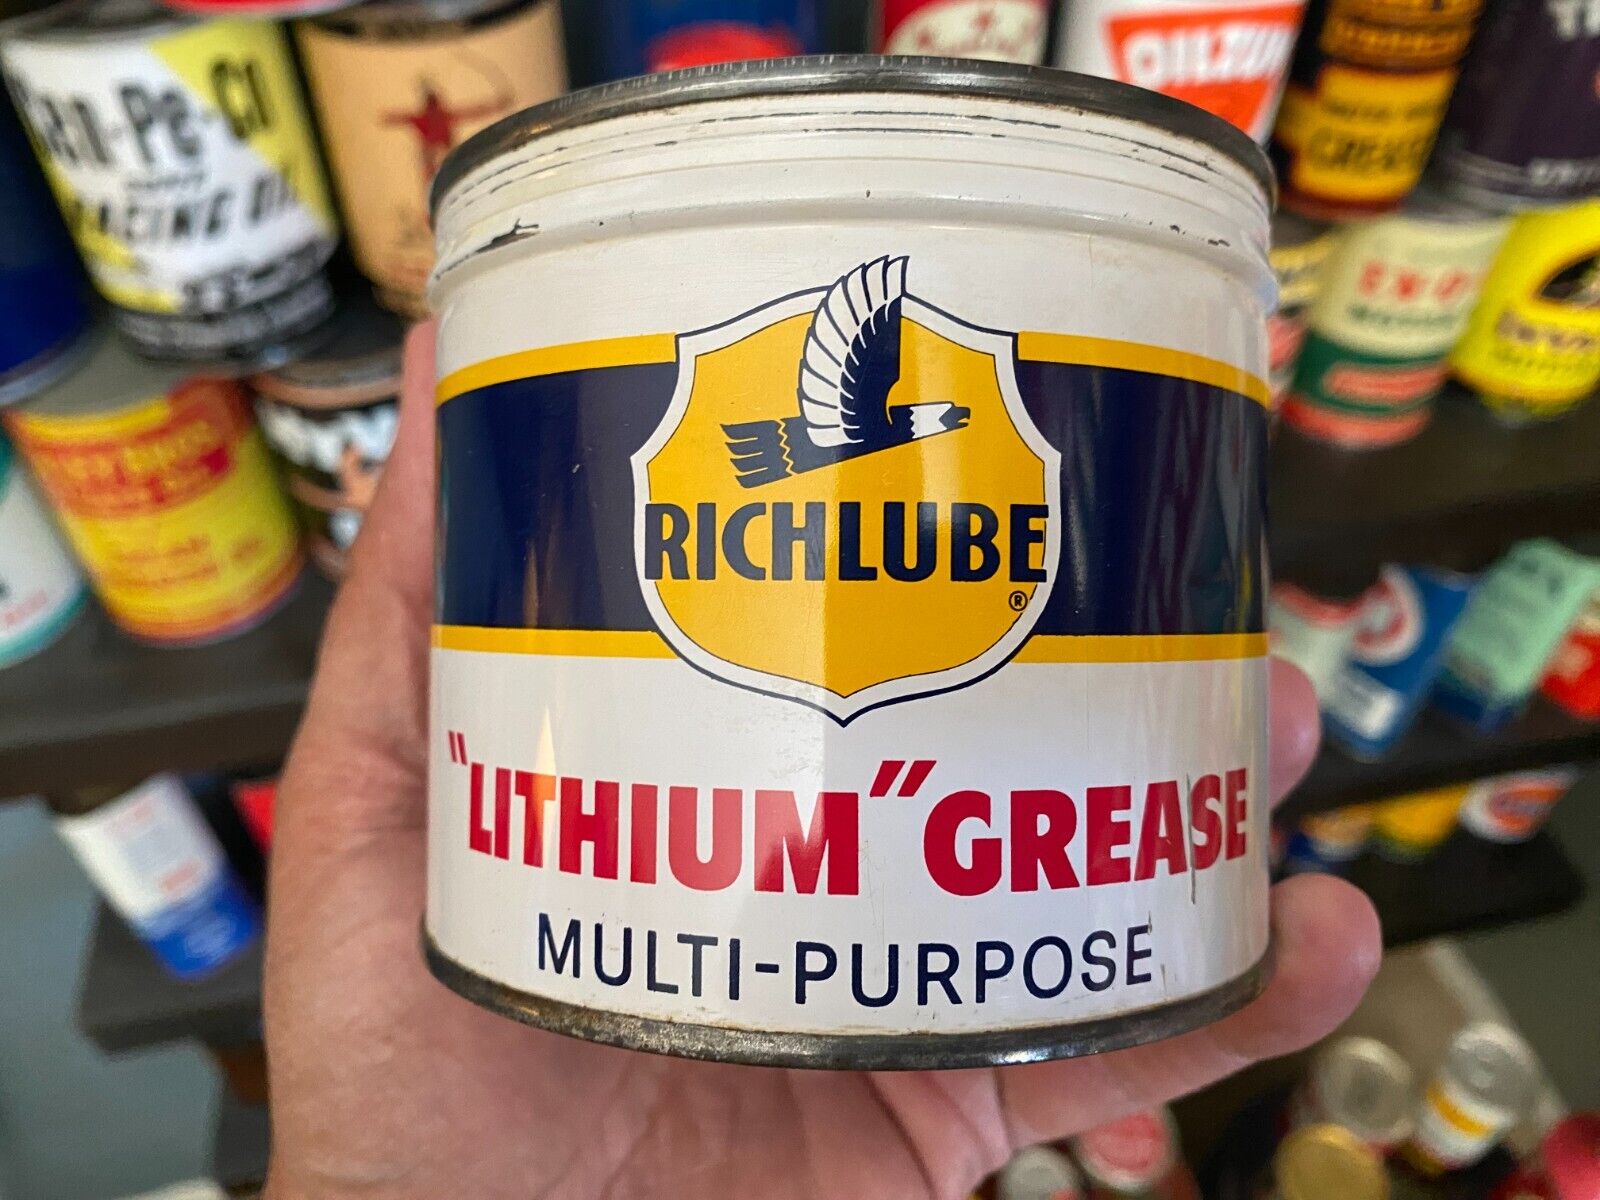 VINTAGE~ FULL NOS~ RICHFIELD RICHLUBE 1 POUND GREASE CAN~ SUPER RARE NICE CAN